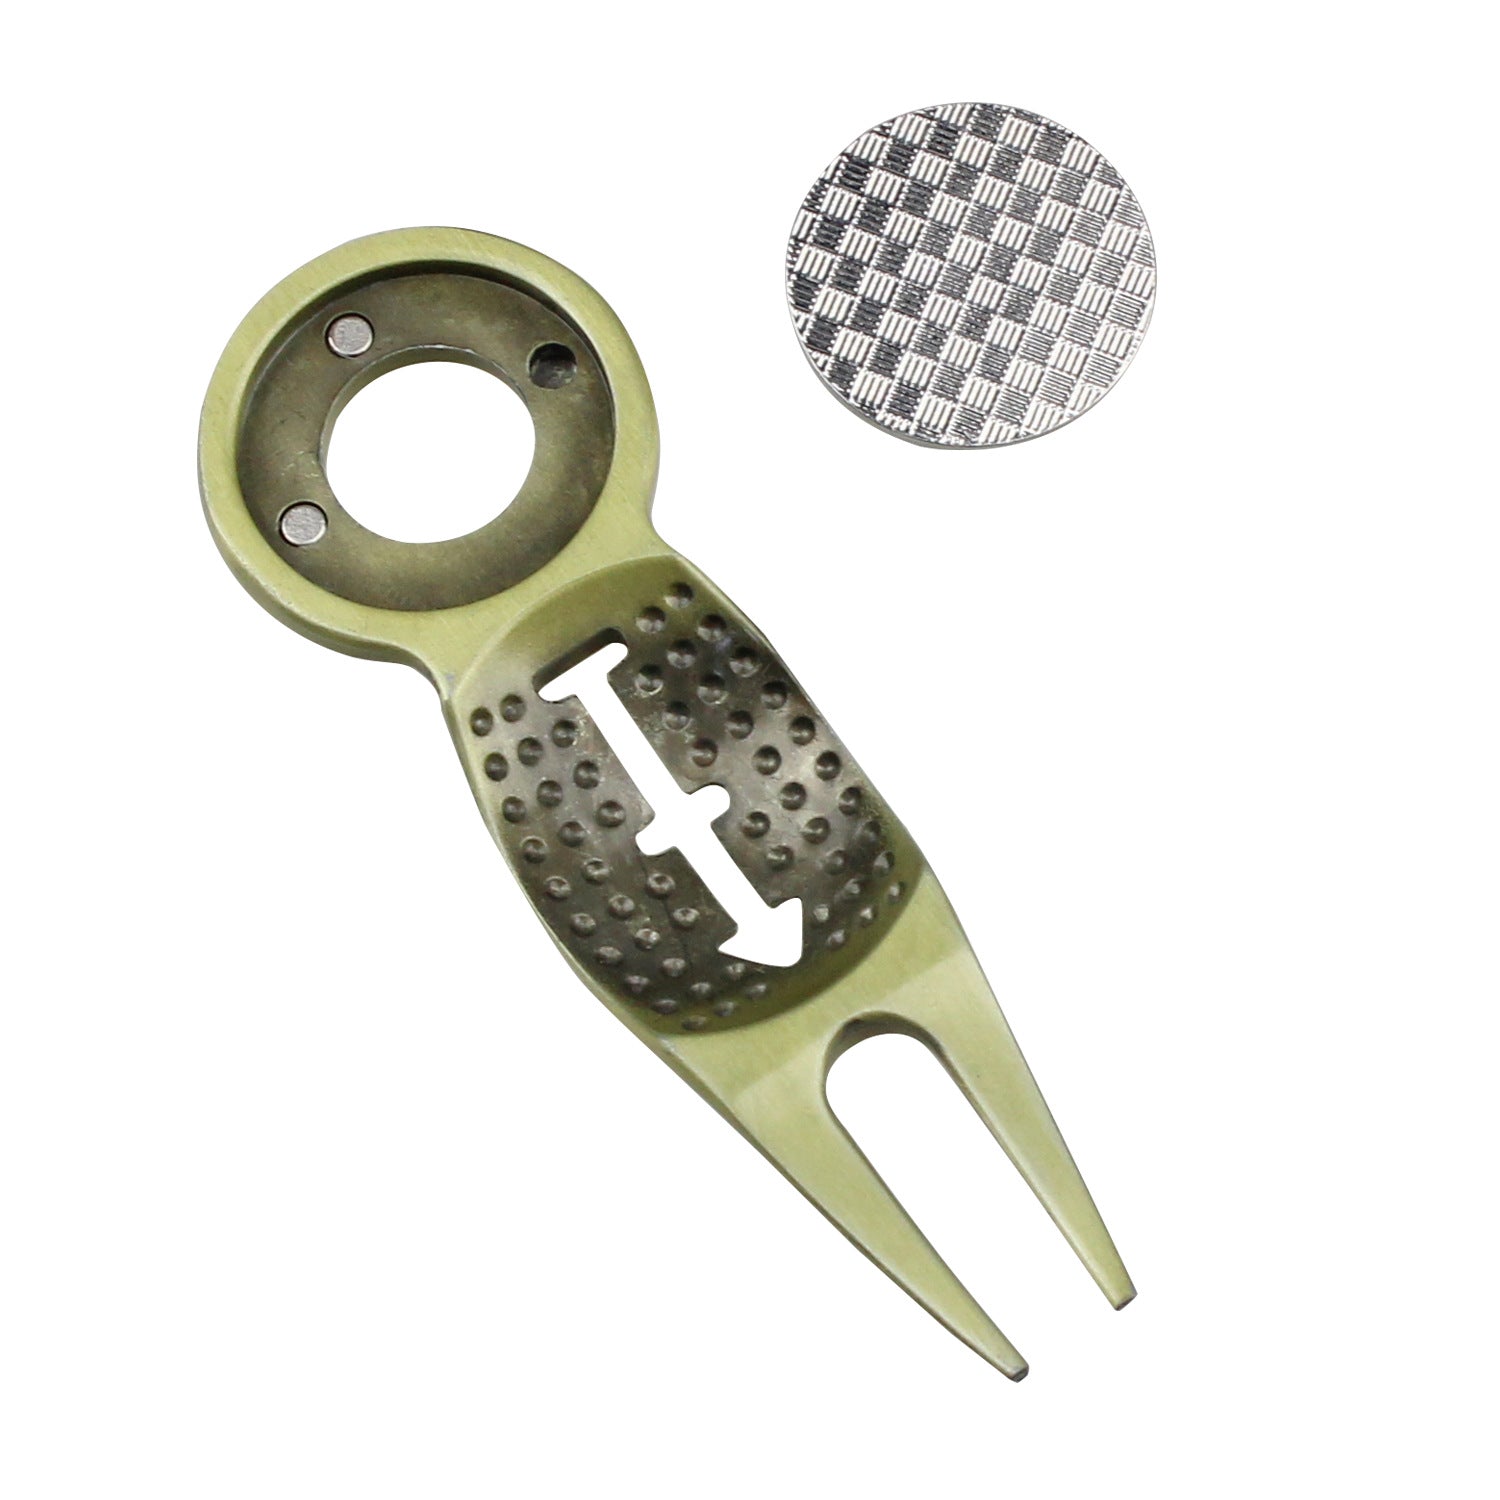 Lesmart Golf Divot Repair Tool with Removeable Ball Marker